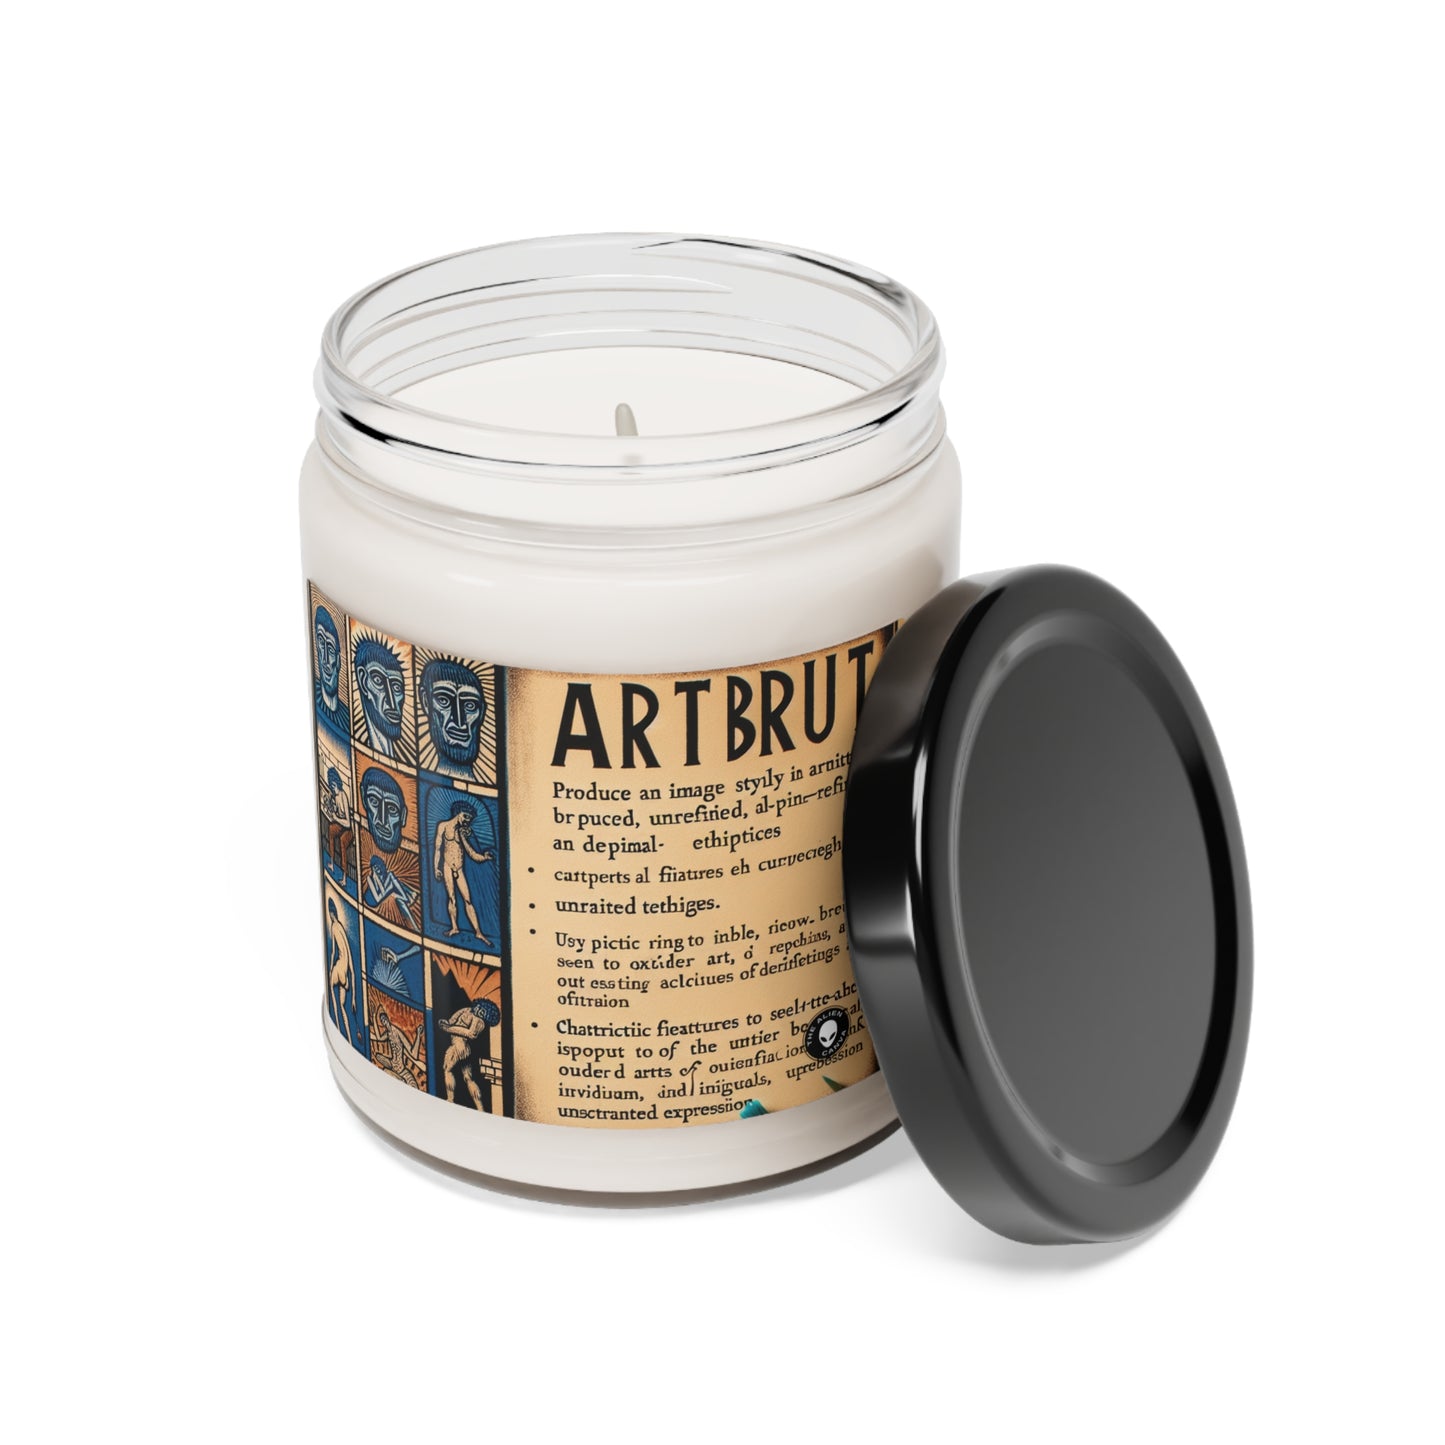 "Whimsical Chaos: A Vibrant Art Brut Cityscape" - The Alien Scented Soy Candle 9oz Art Brut